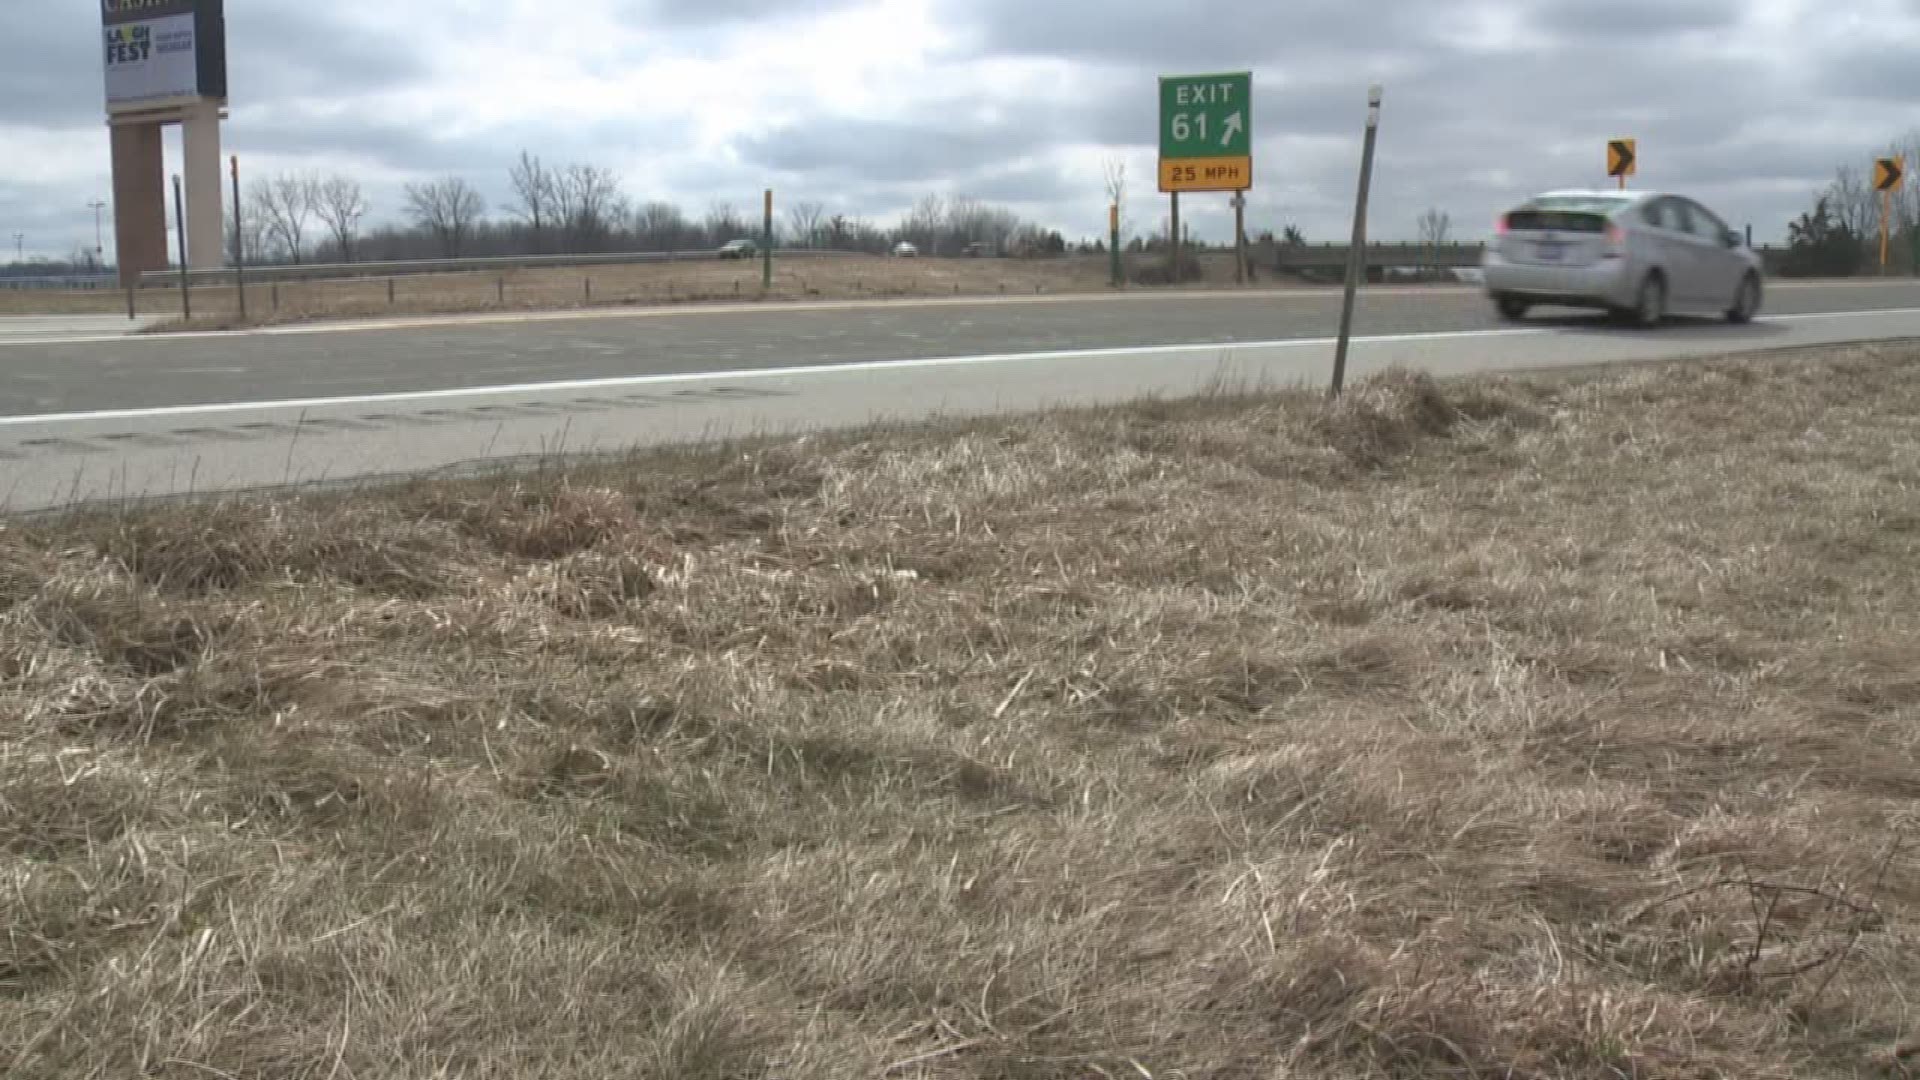 A drunk driving accident on the highway killed a 15-year-old girl from Grand Rapids.